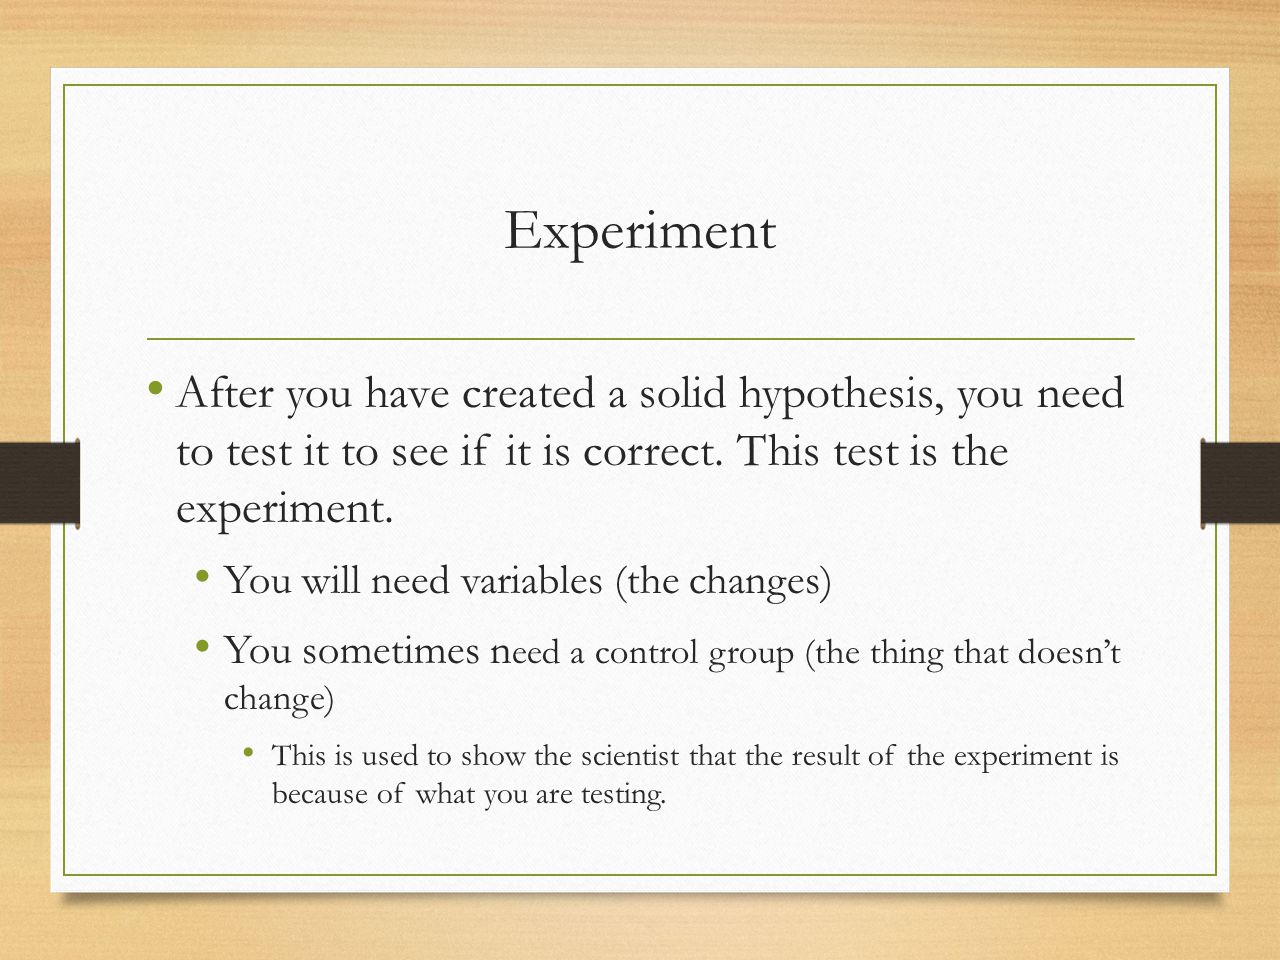 Experiment After you have created a solid hypothesis, you need to test it to see if it is correct. This test is the experiment.